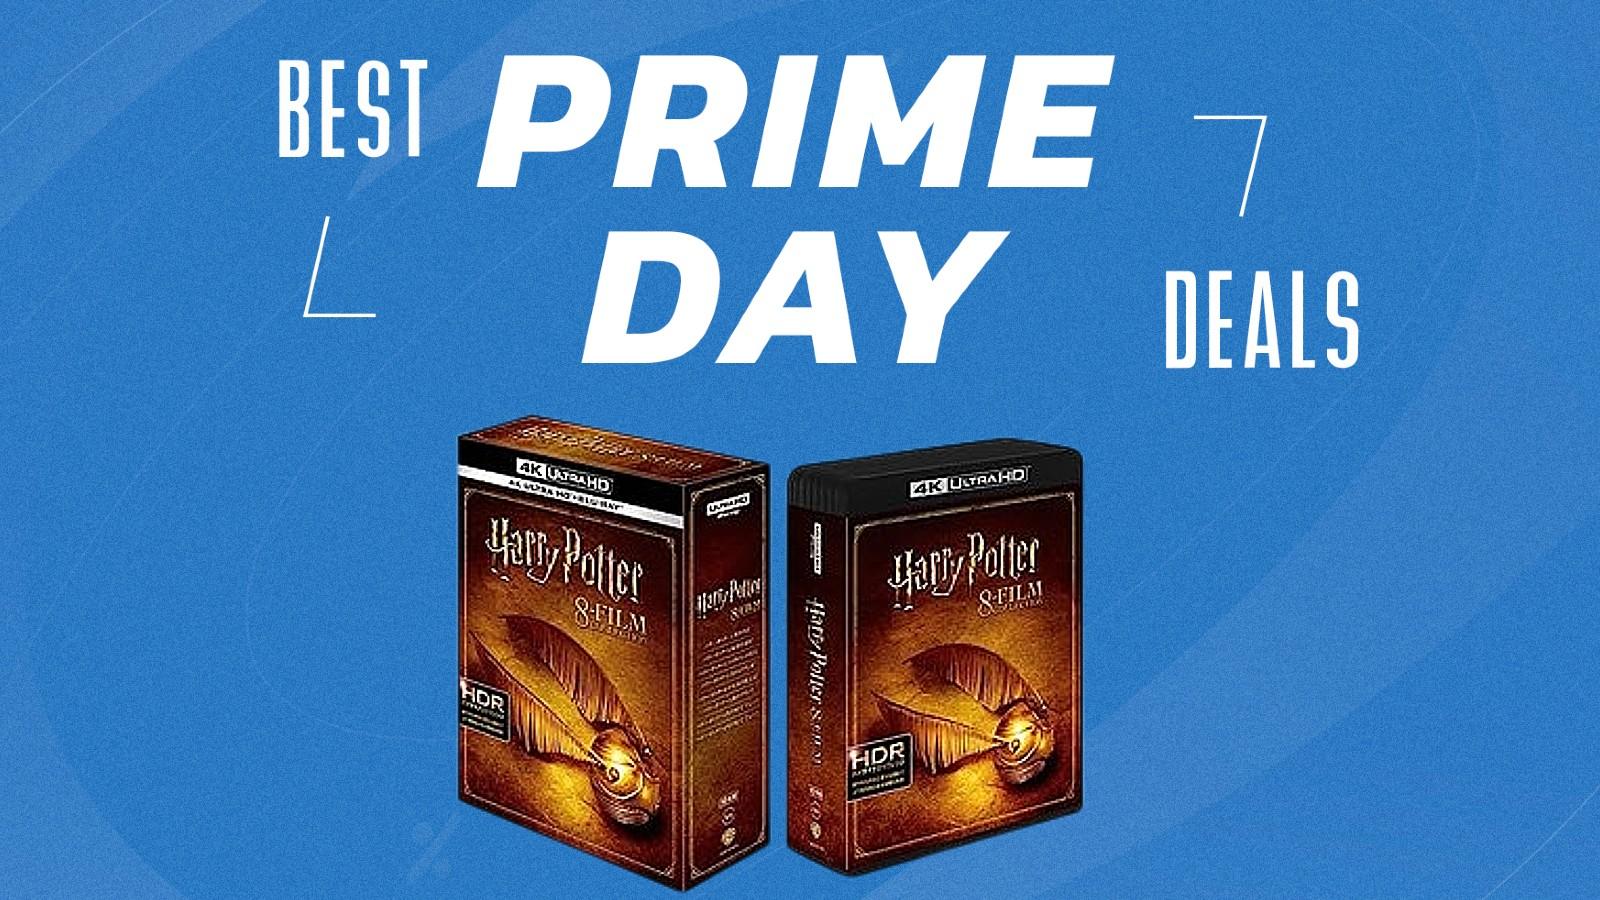 Harry Potter and the Deathly Hallows: Part 1 4K Blu-ray (4K Ultra HD +  Blu-ray)